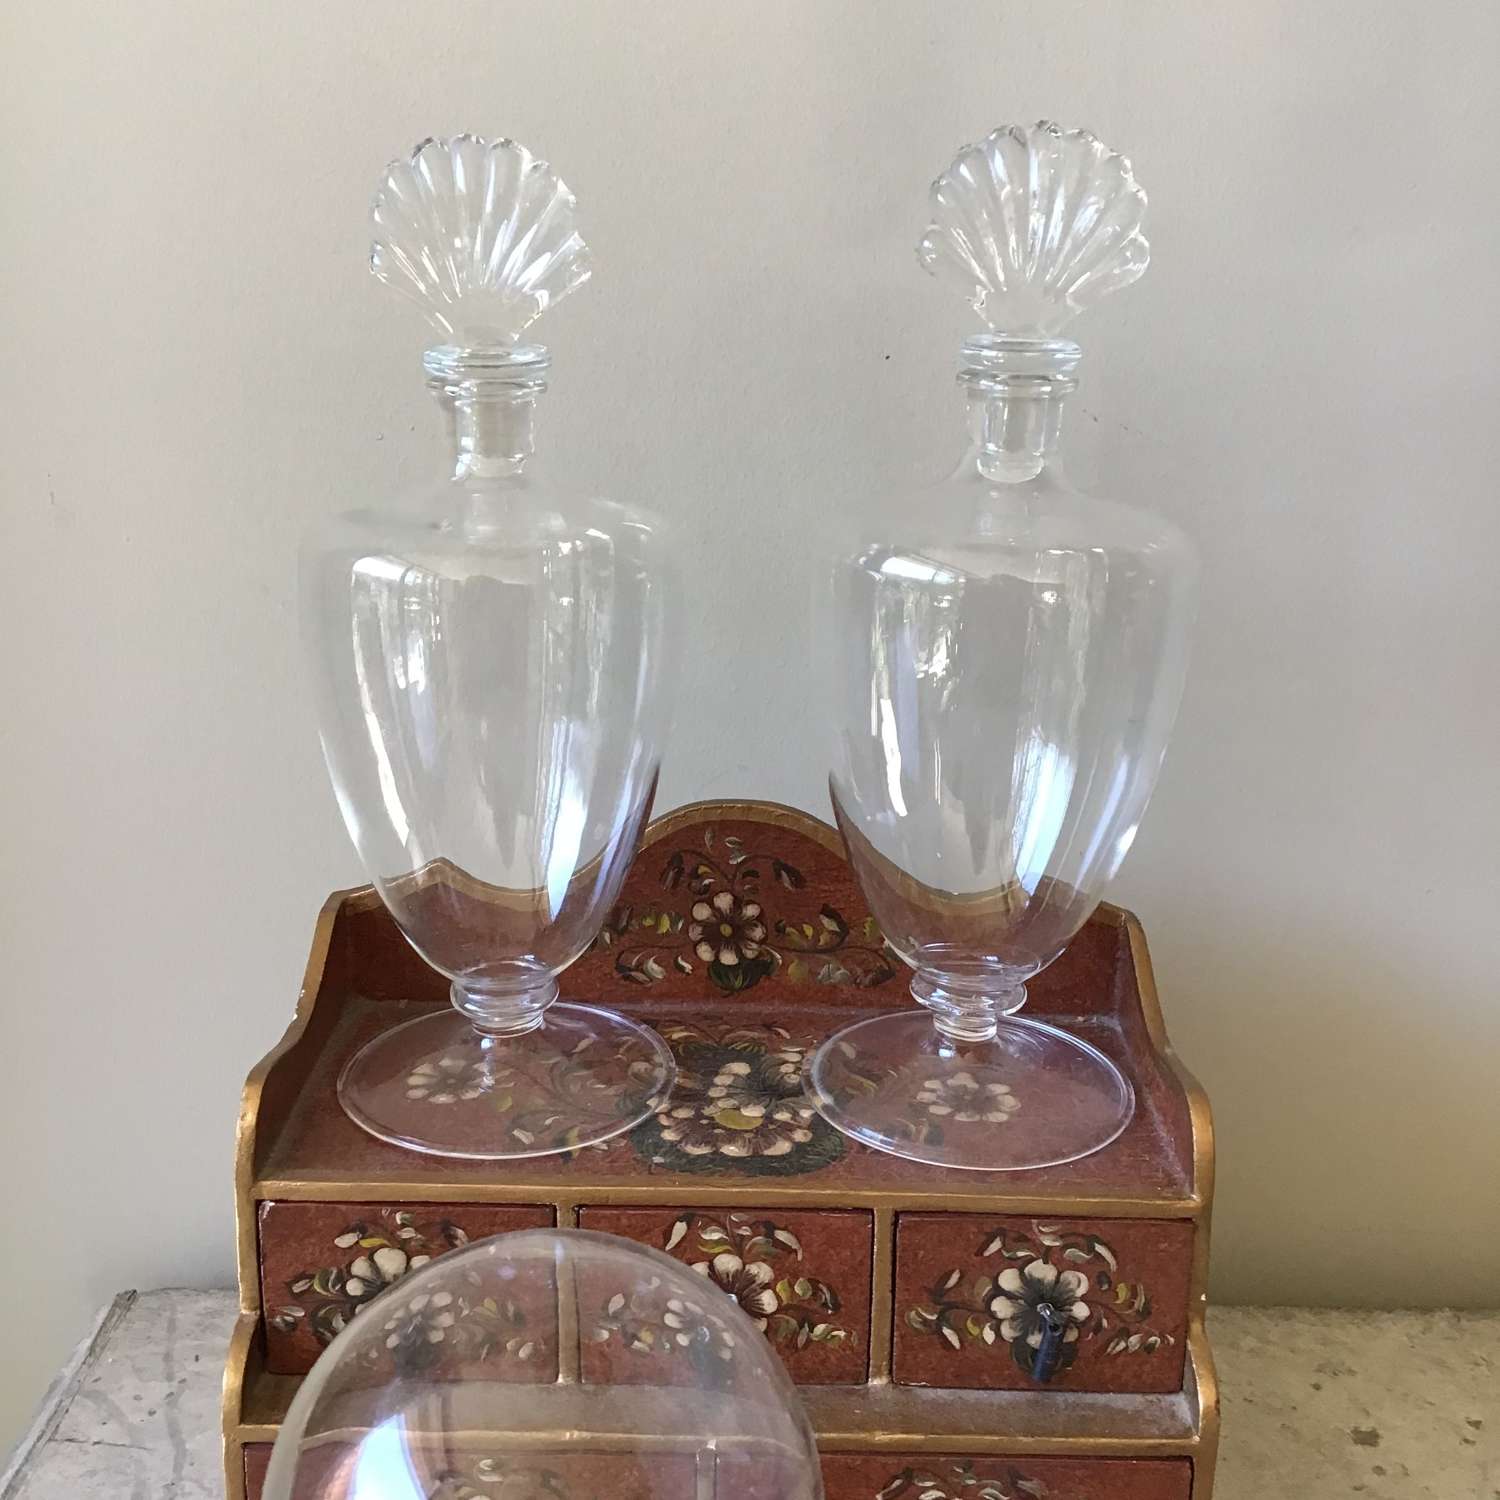 A pair of shell glass lotion bottles, also available separately